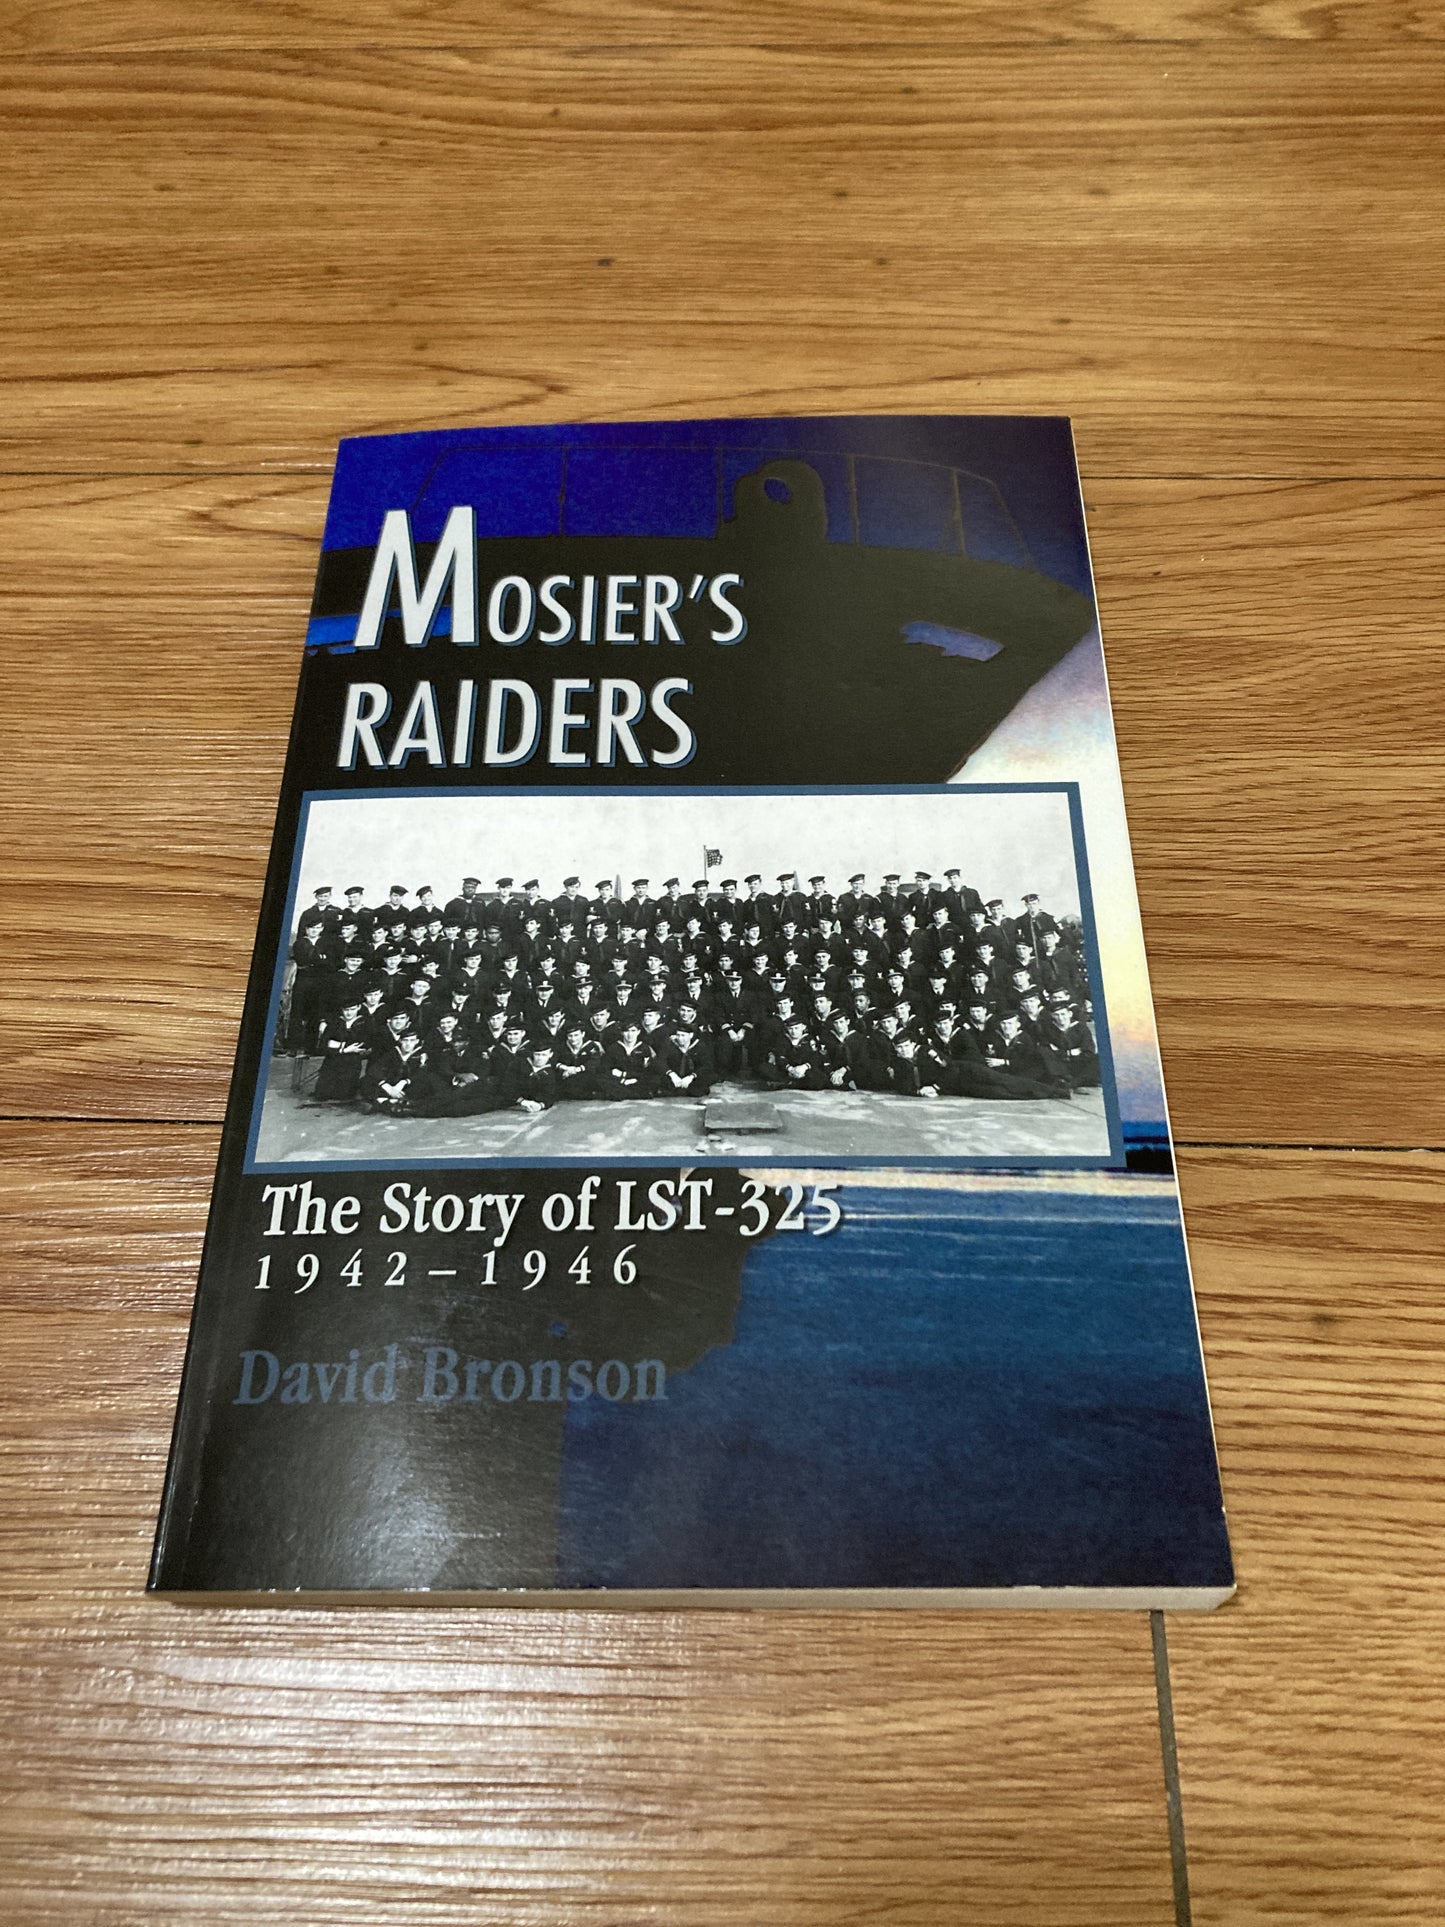 Mosier's Raiders: The Story of LST-325